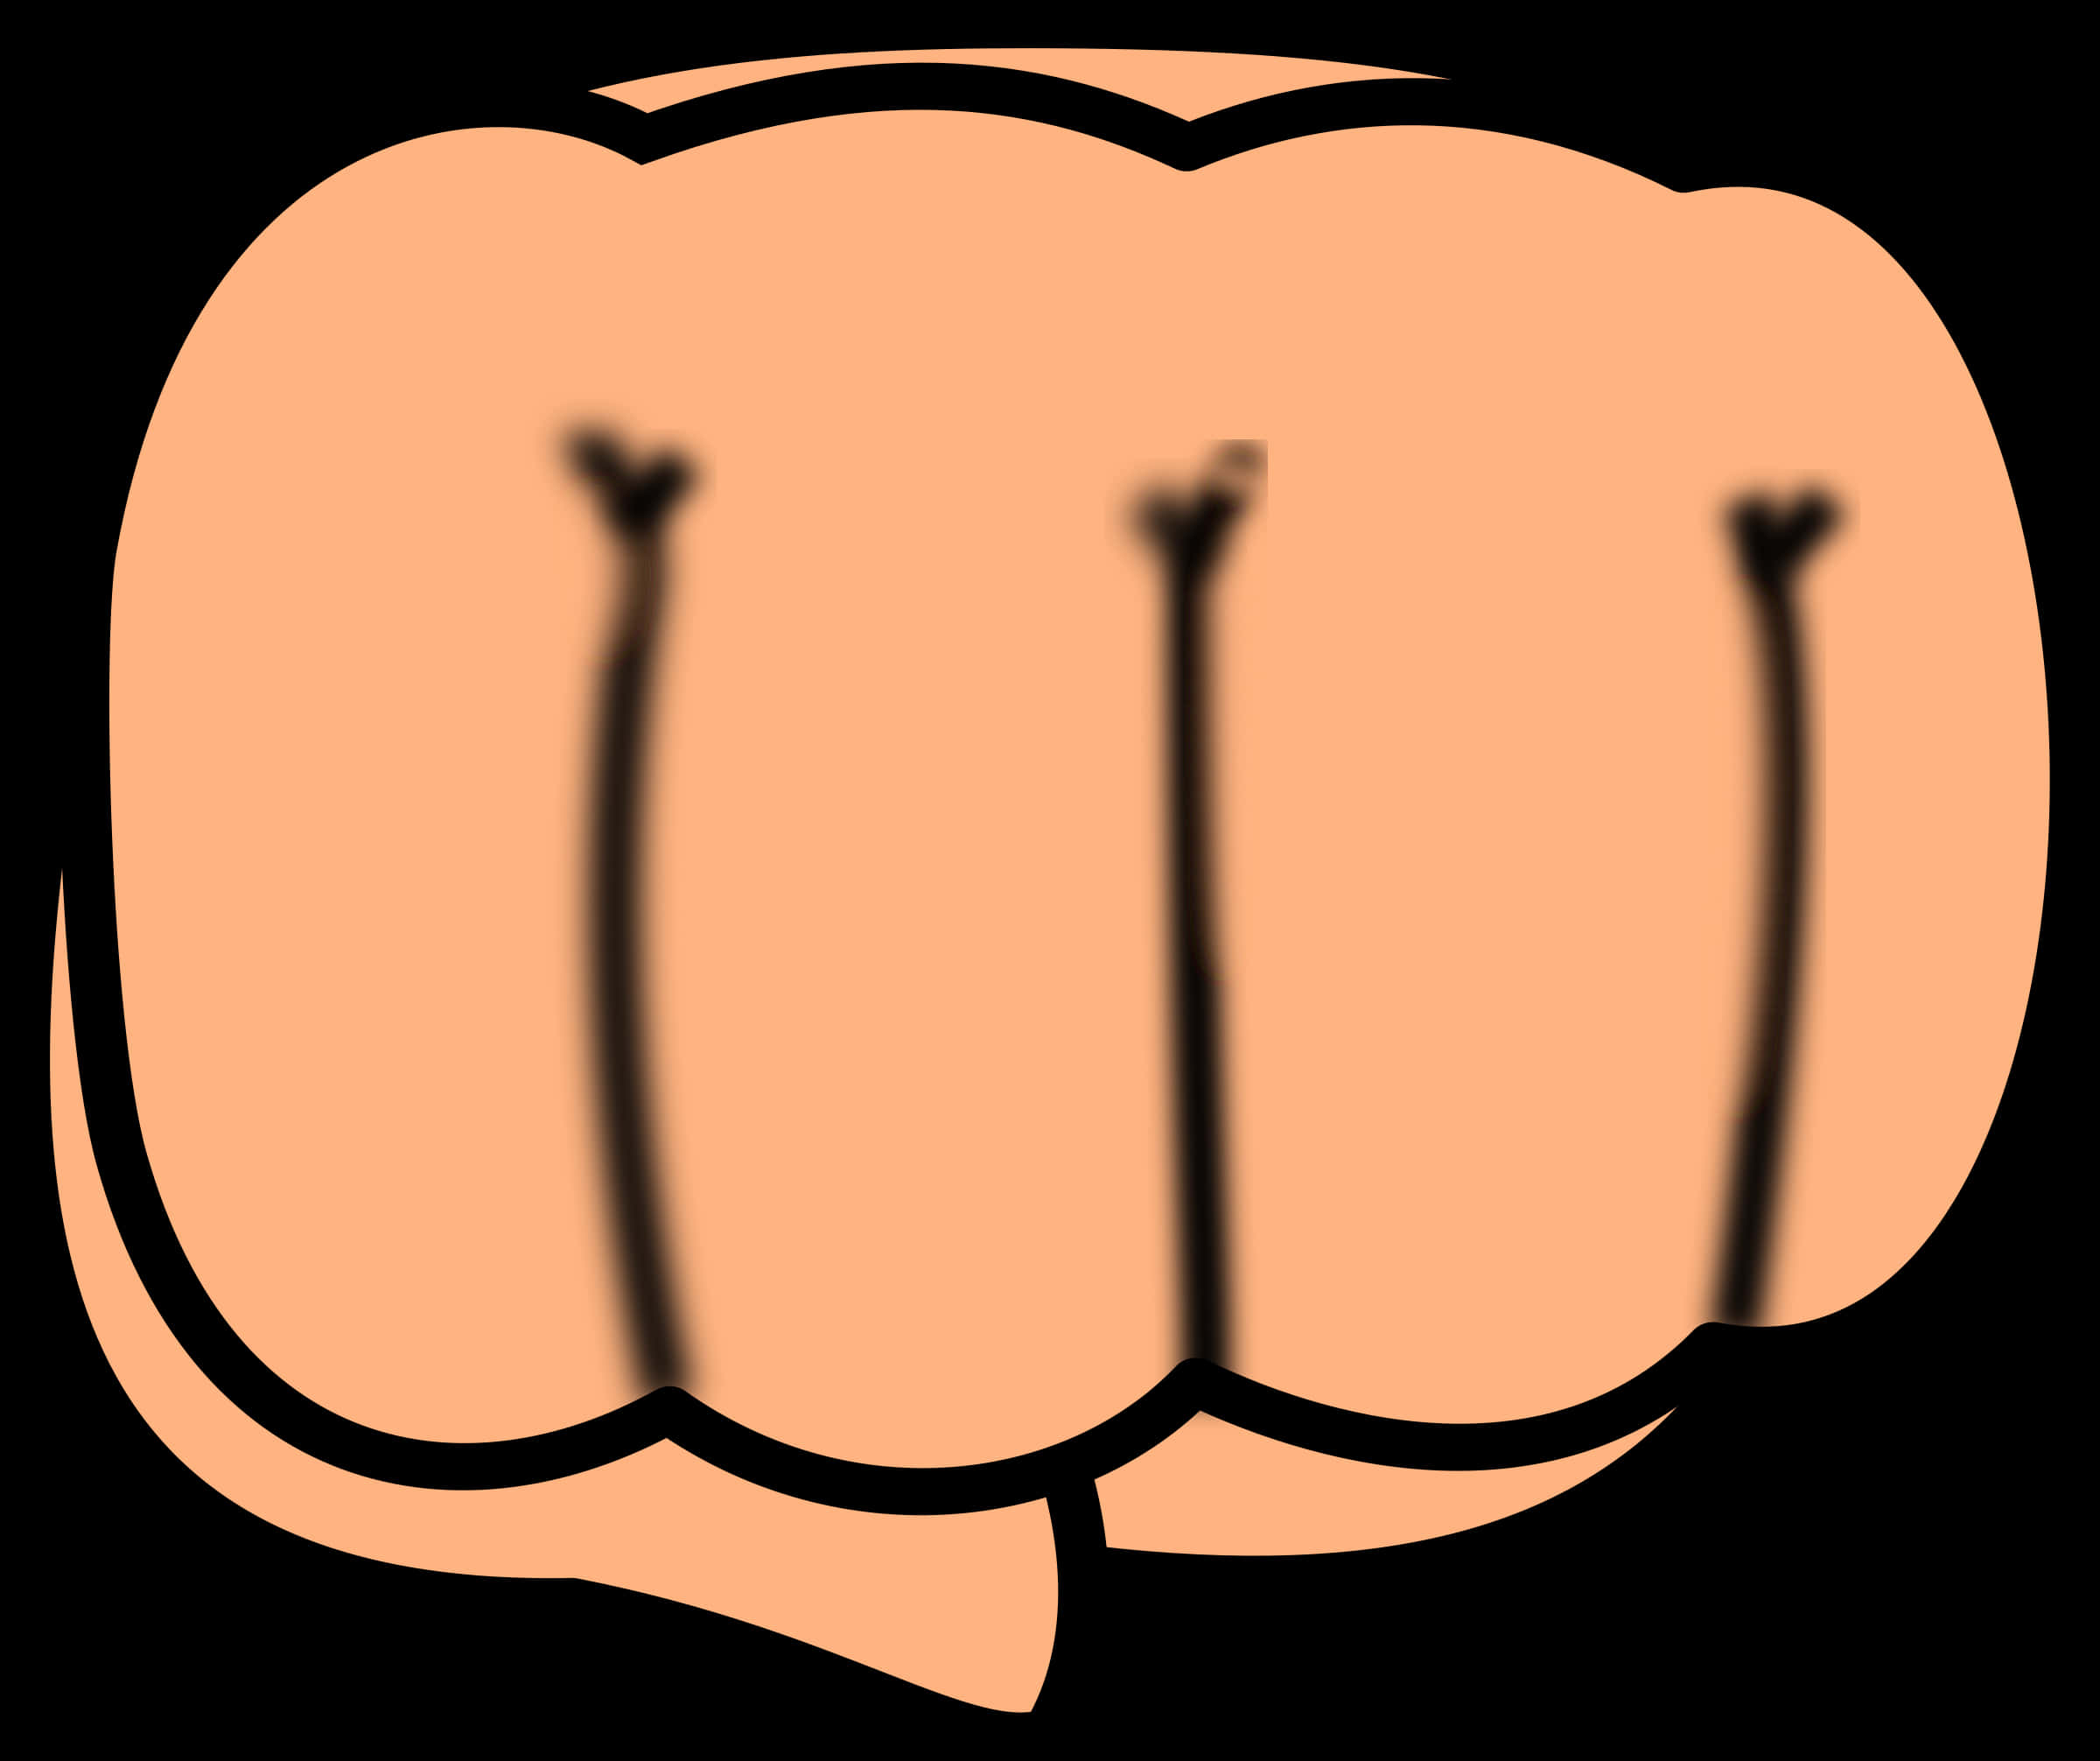 A Cartoon Fist With Black Background